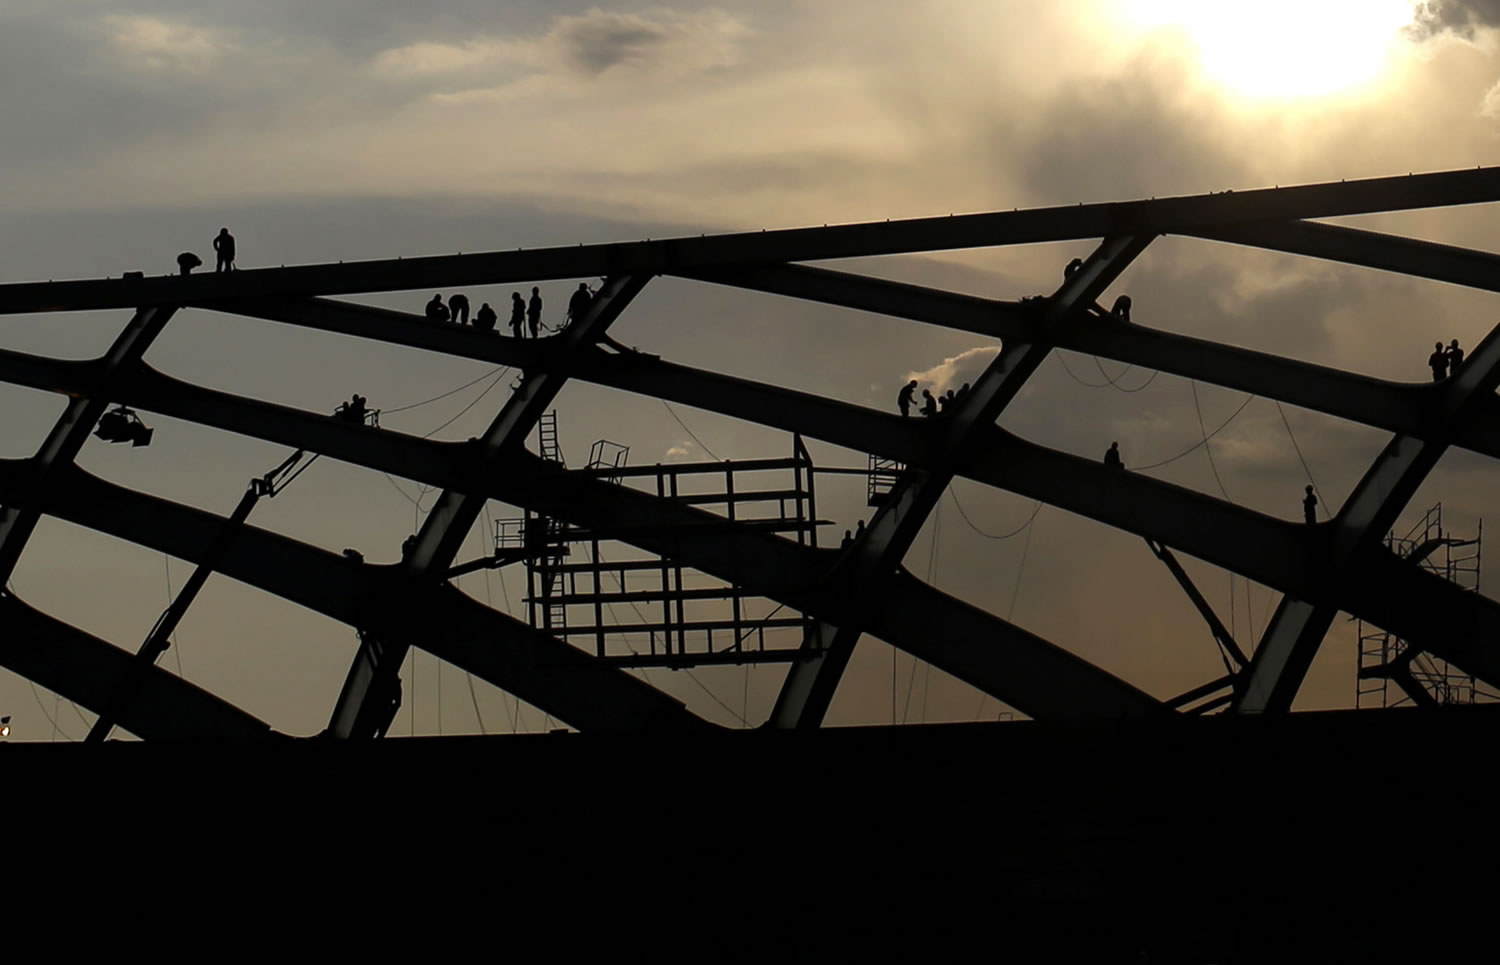 Construction workers works Tuesday on the roof of the Arena da Amazonia stadium, in Manaus, Brazil.